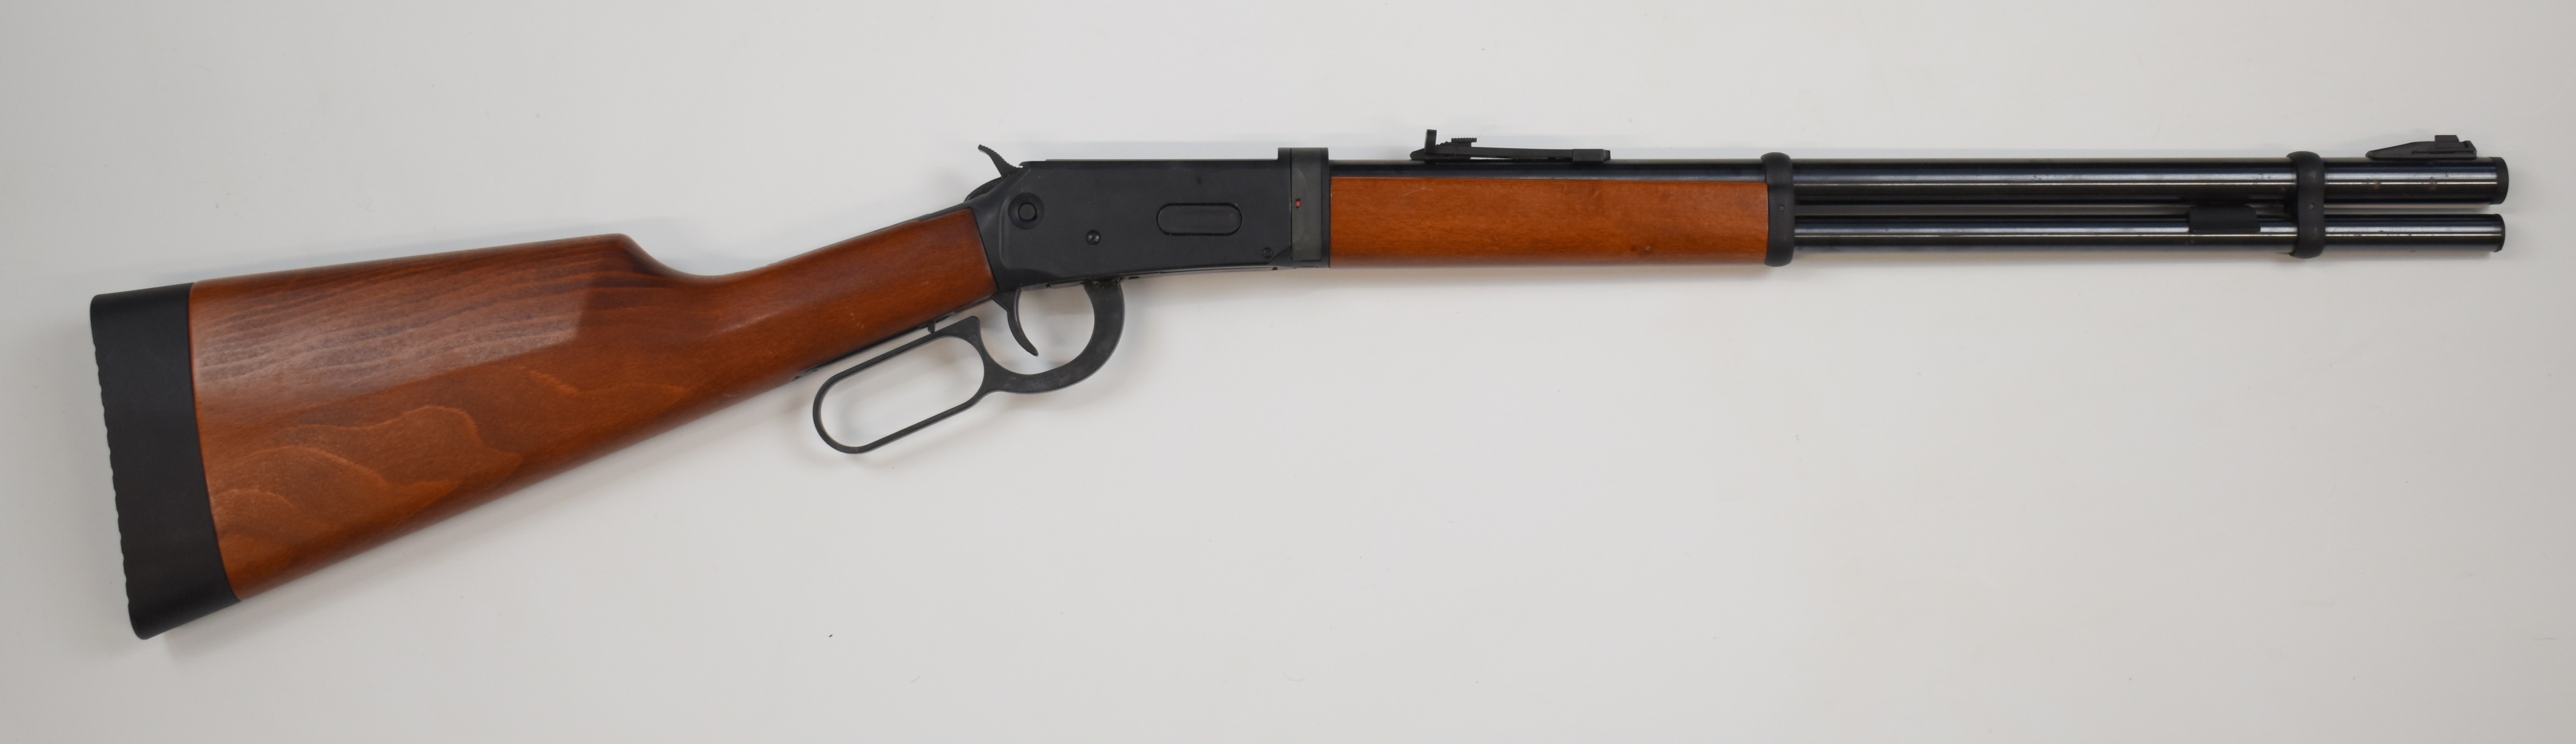 Walther Winchester style lever-action .177 CO2 carbine air rifle with two 8 shot magazines, - Image 2 of 11